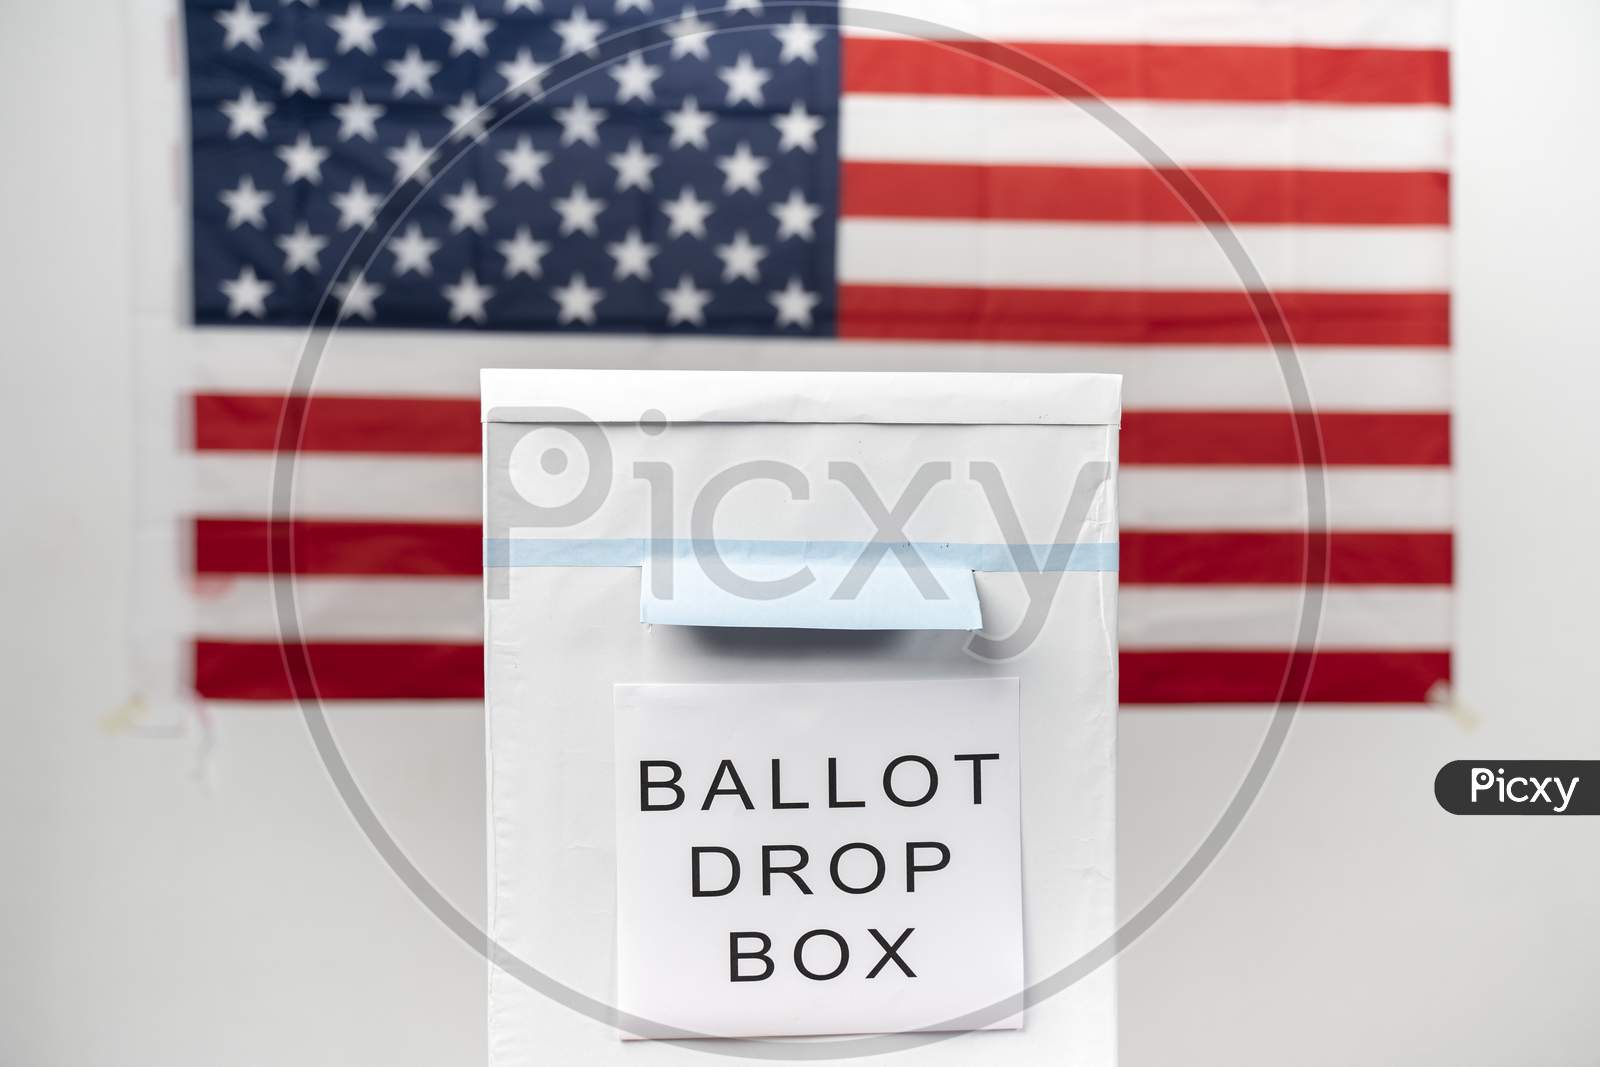 Concept Of Mail In Vote At Us Election -Ballot Box With Us Flag As Background.